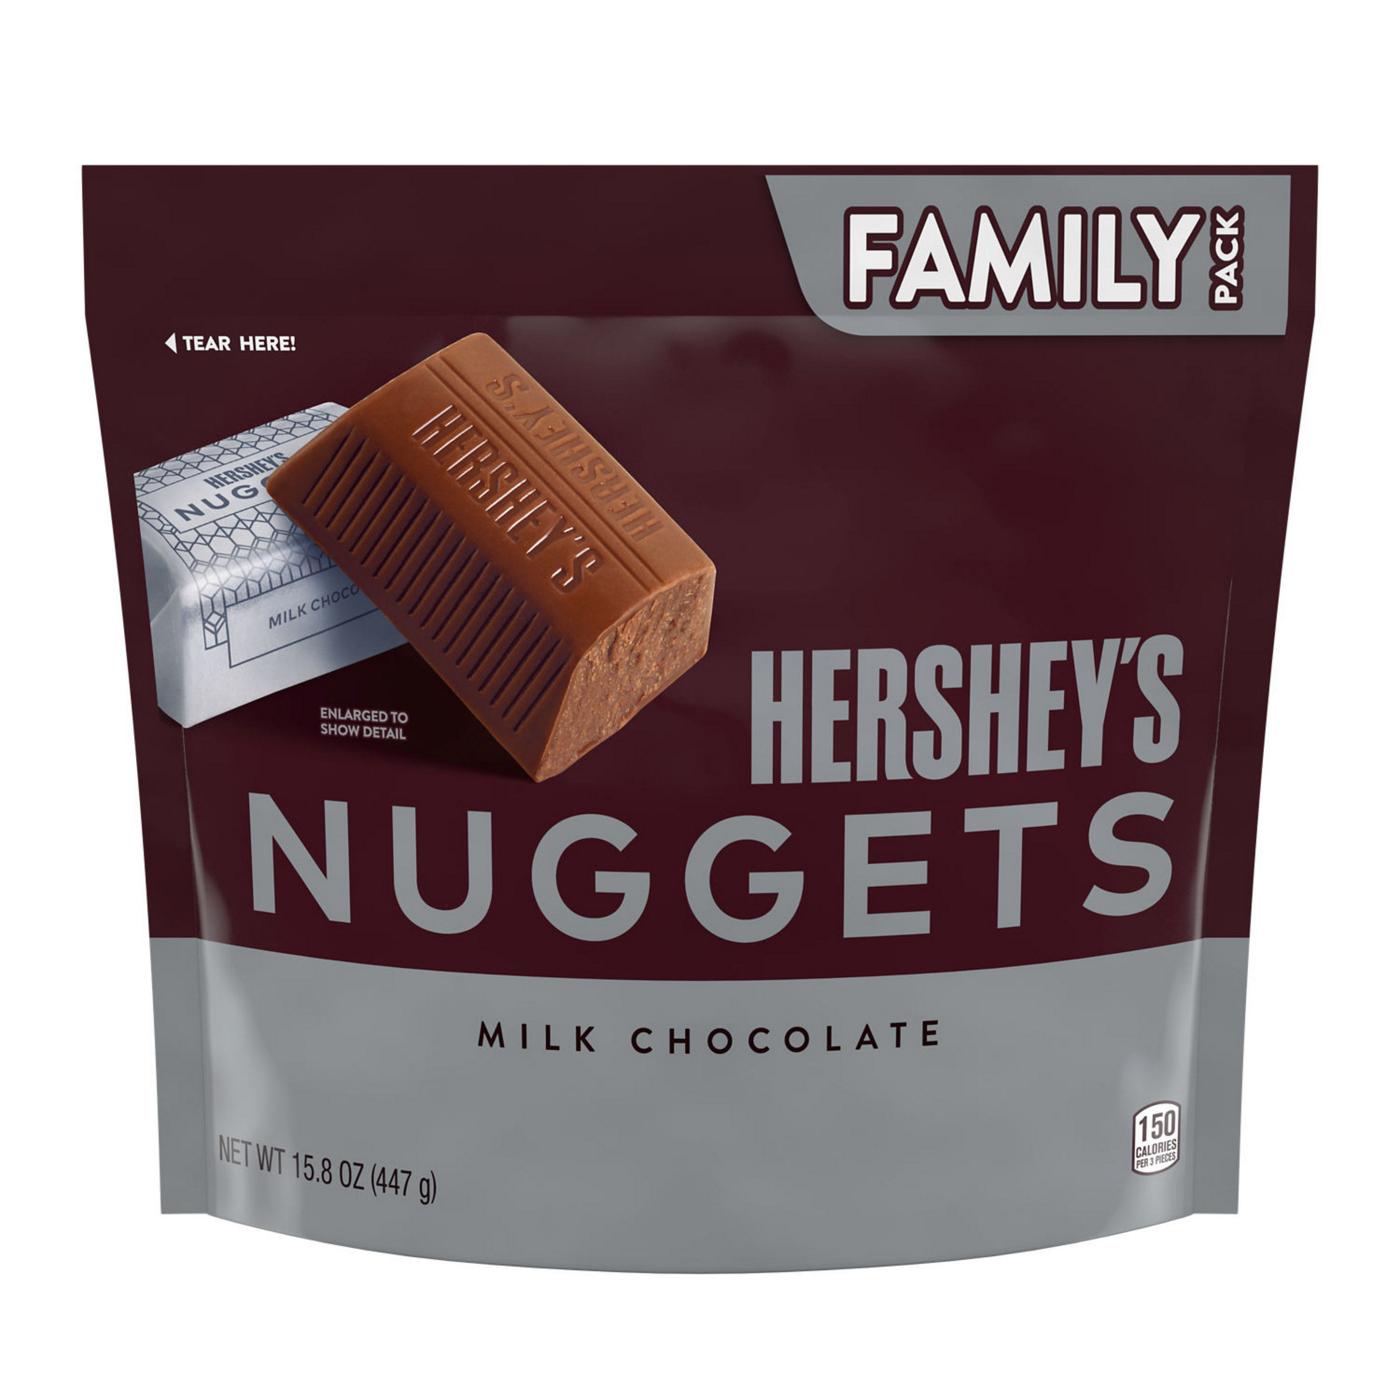 Hershey's Nuggets Milk Chocolate Candy - Family Pack; image 1 of 7